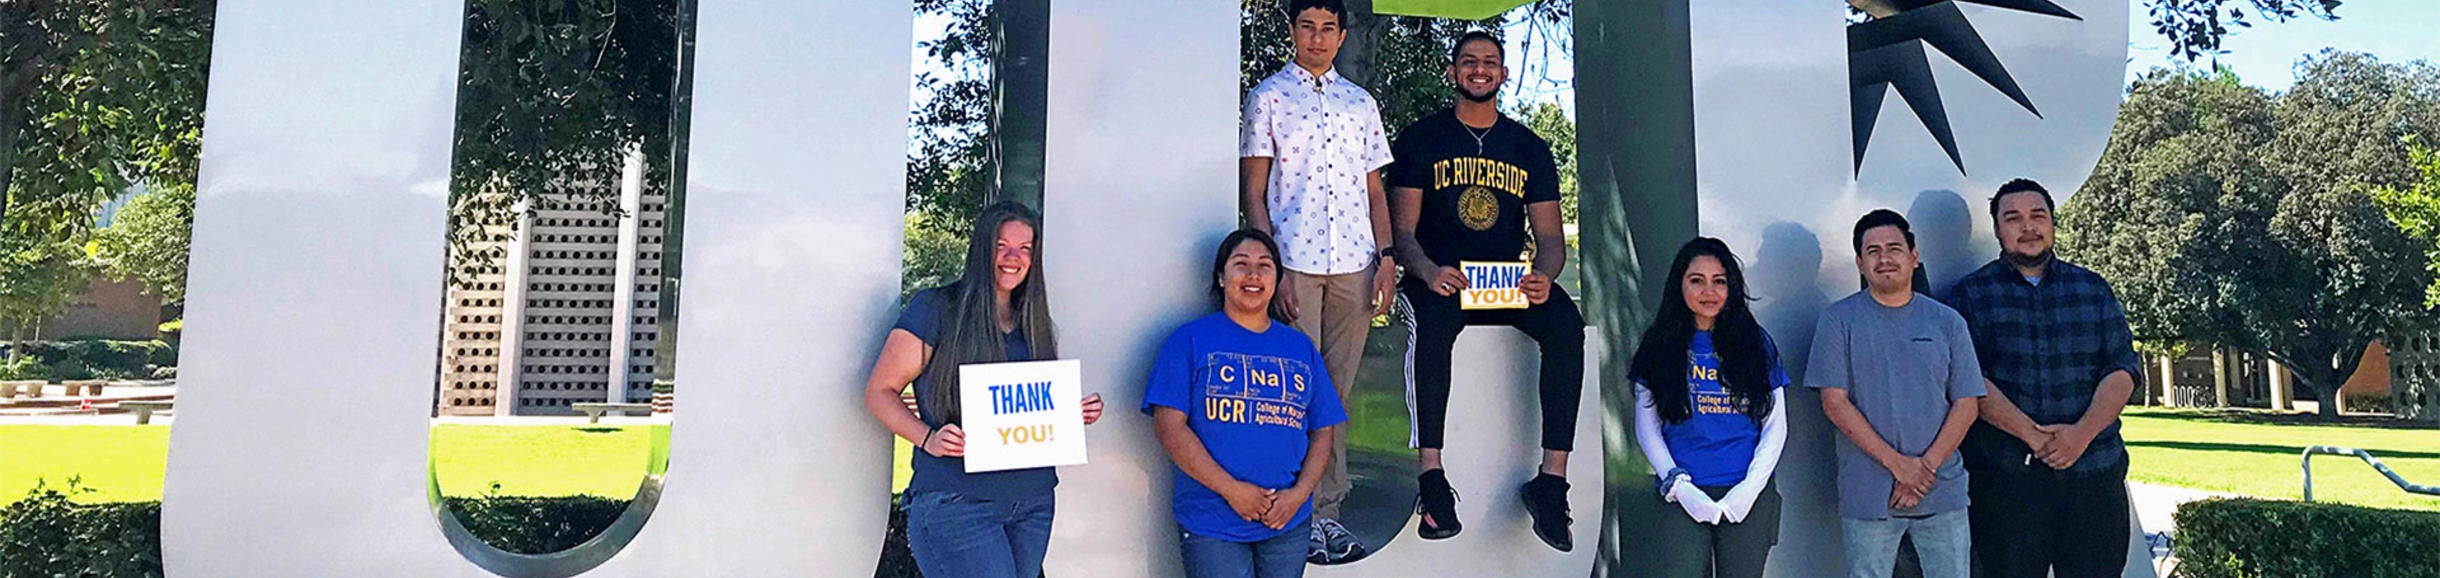 students in front of UCR sign holding thank you signs